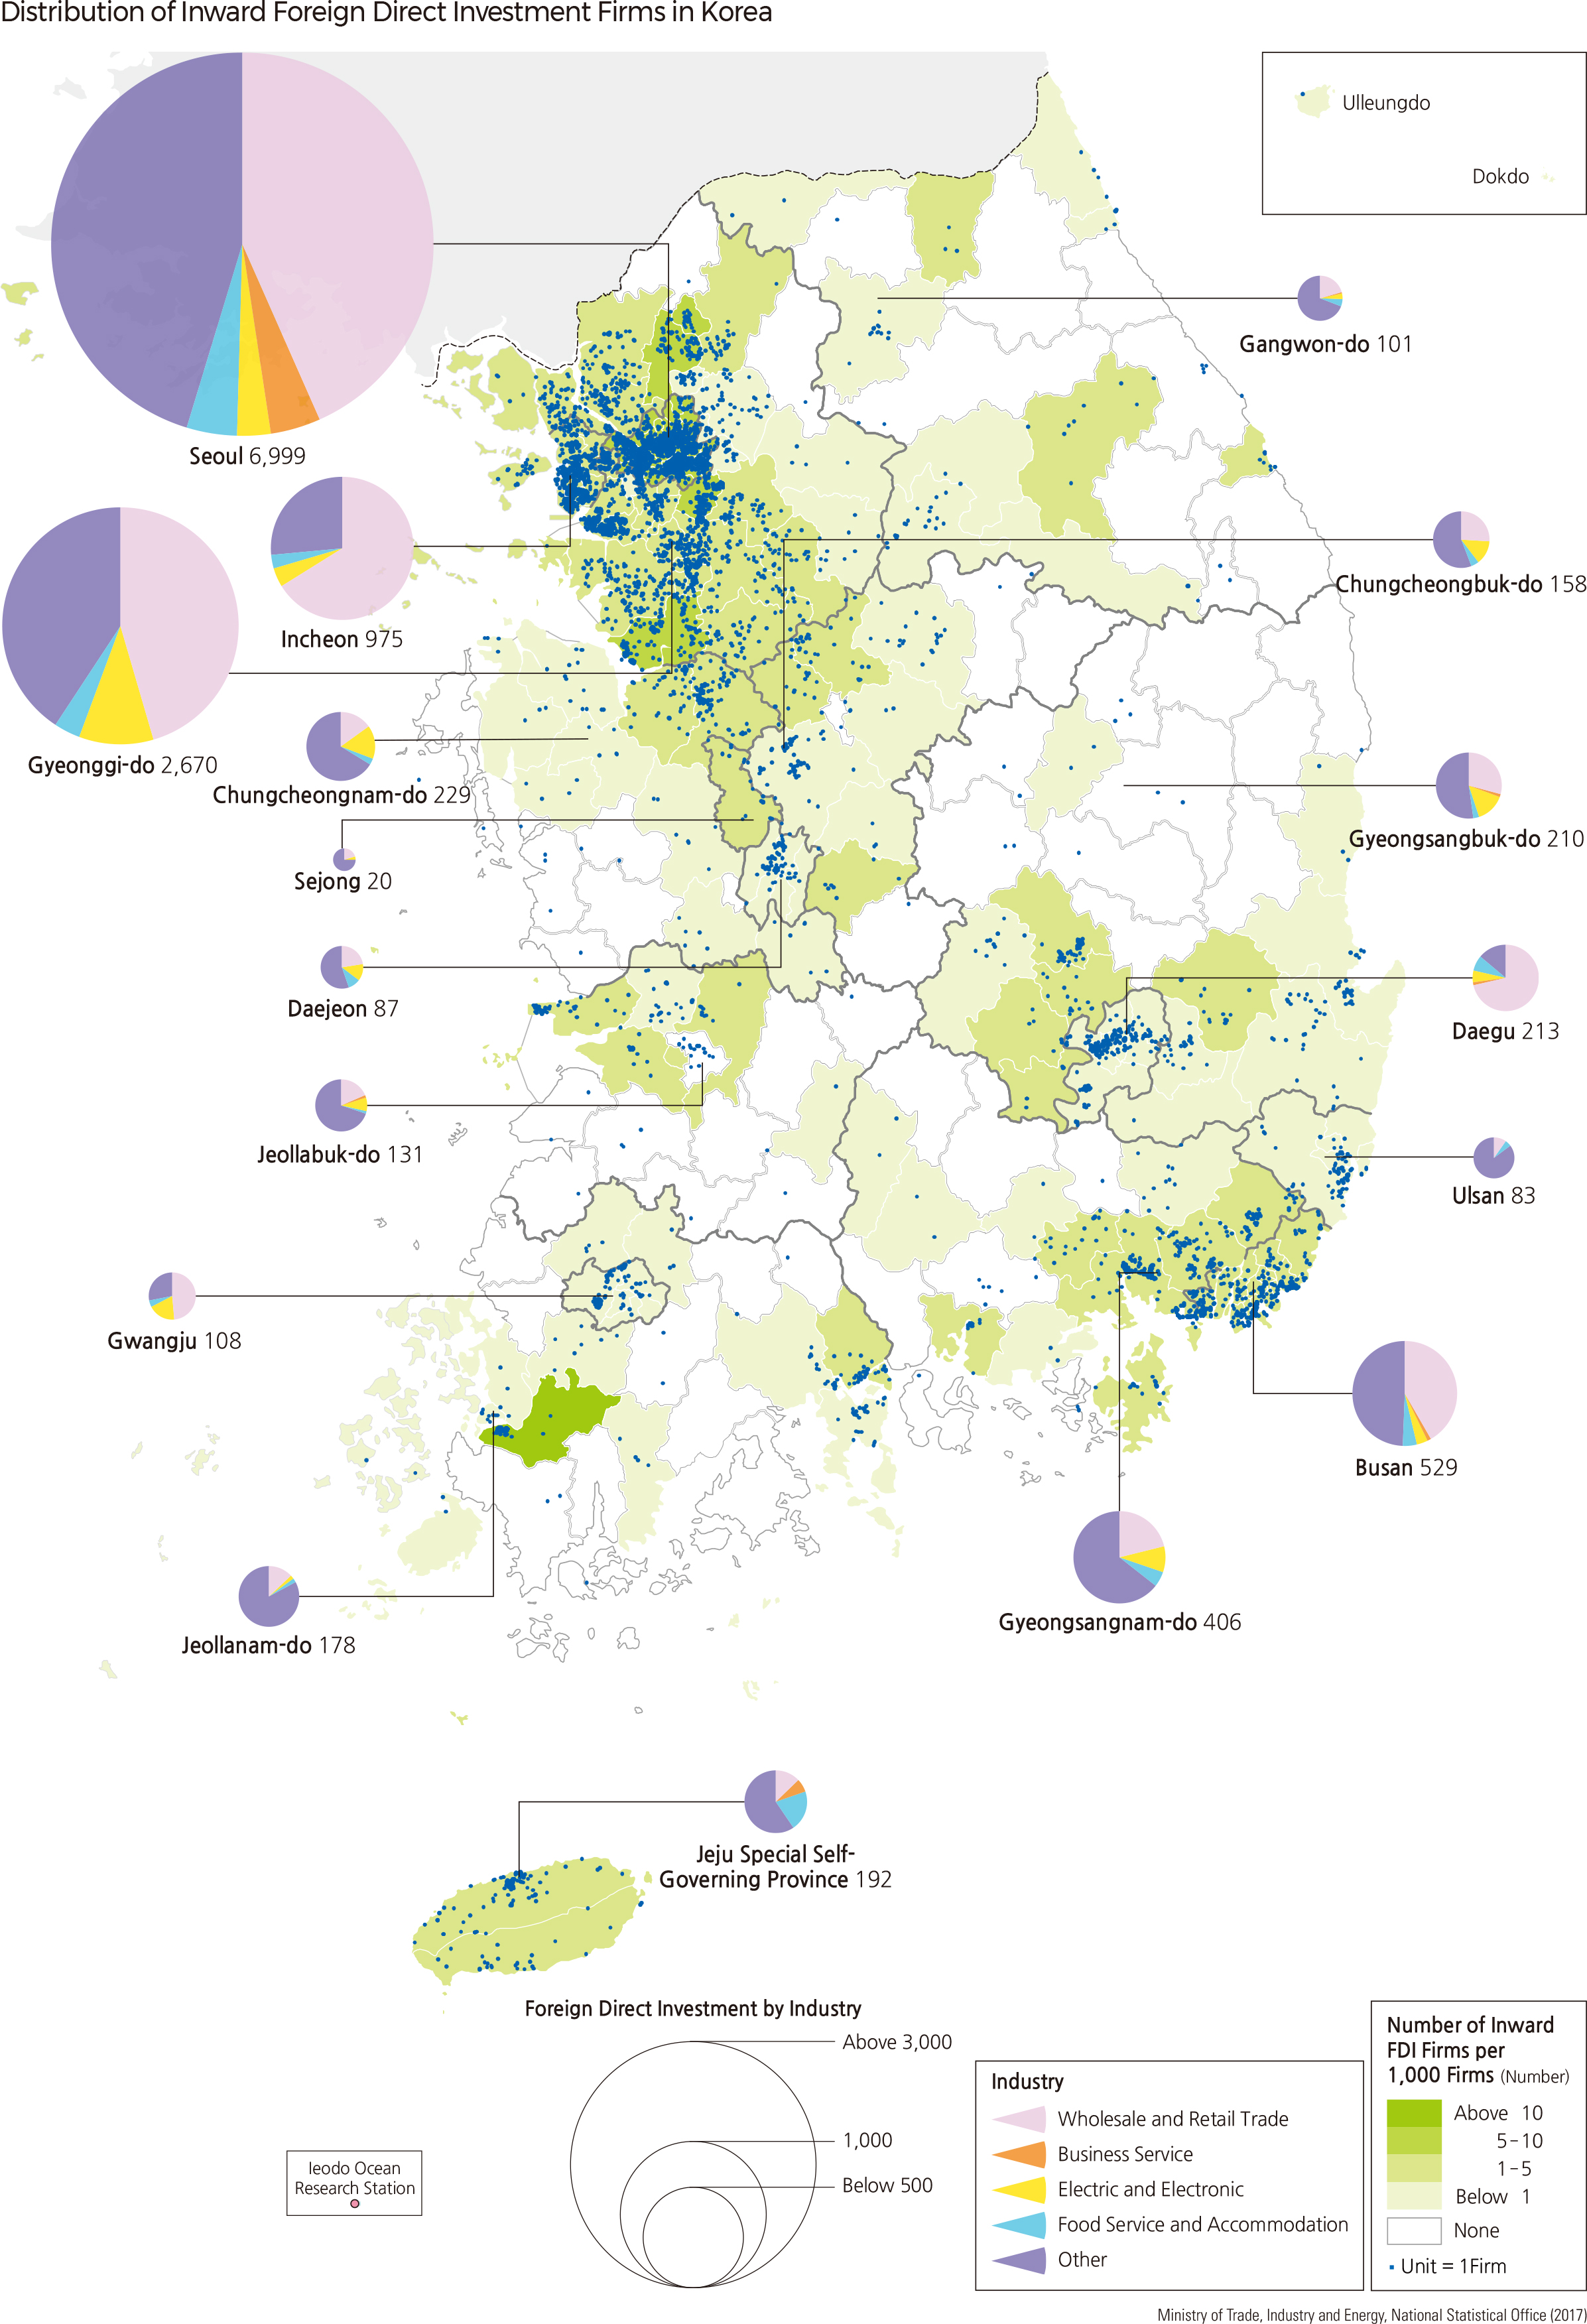 Distribution of Inward Foreign Direct Investment Firms in Korea